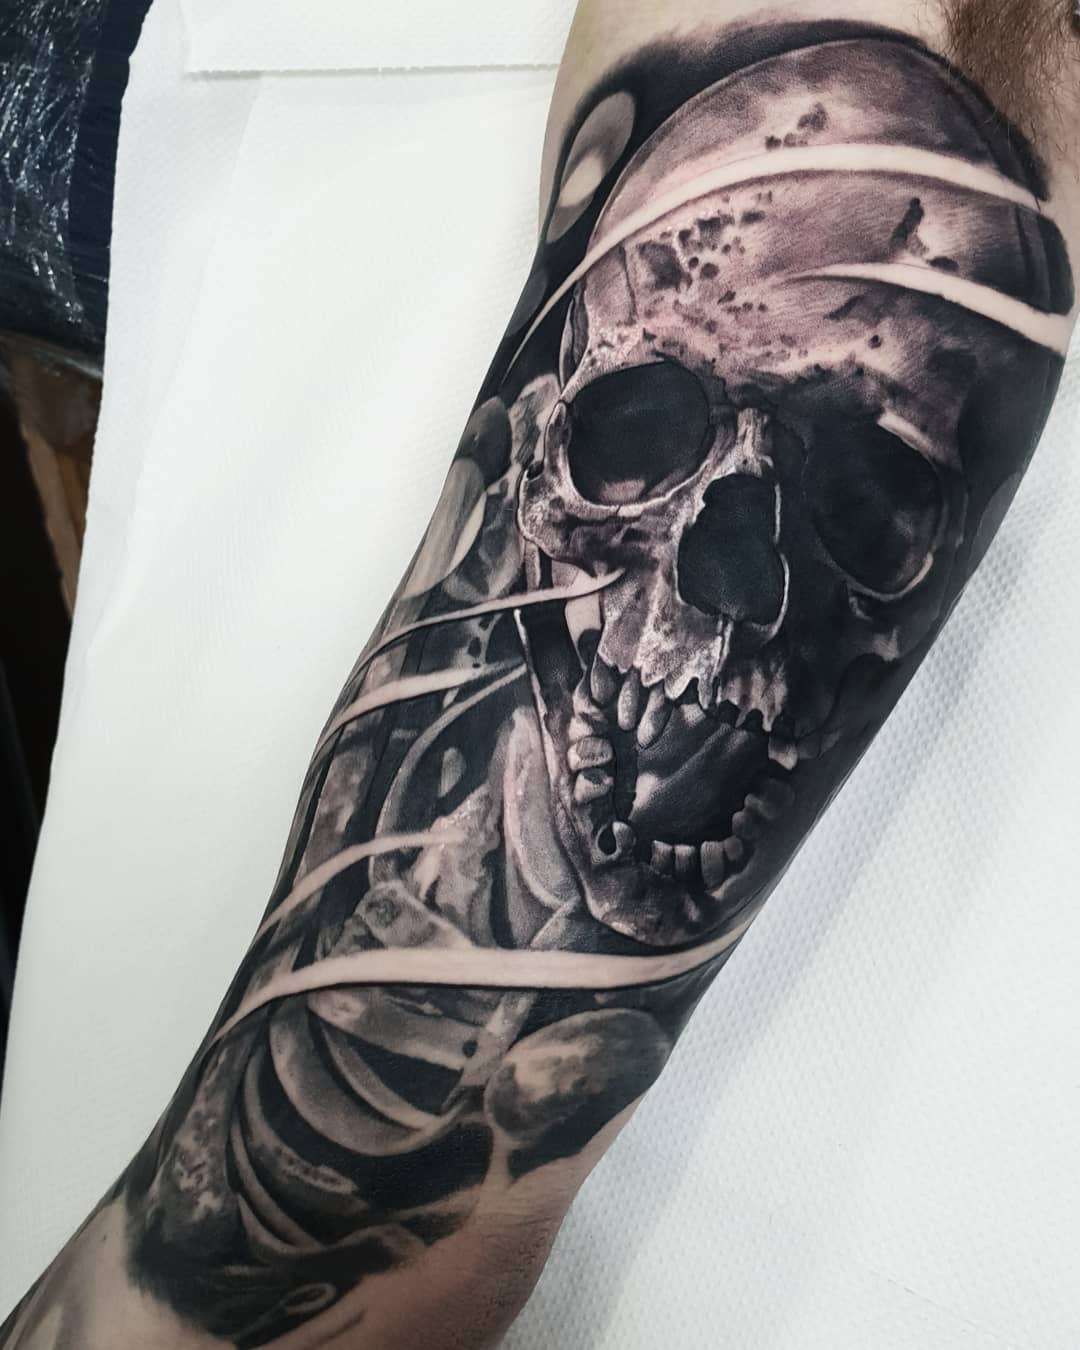 Black and gray detailed tattoo realism by Nick Imms